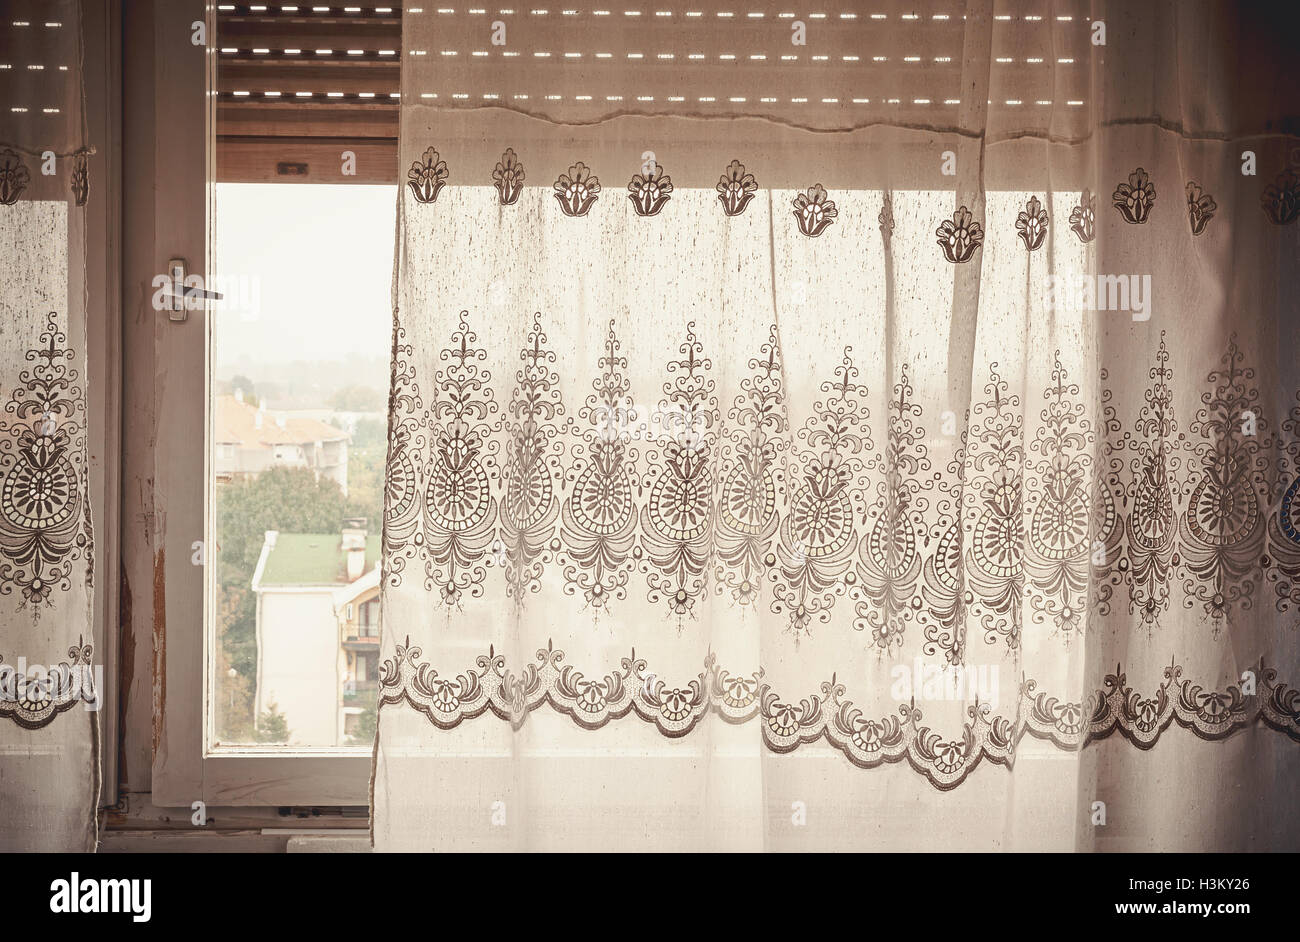 Part of an old curtain, details of an embroidery decoration, window in the back, day time. Stock Photo